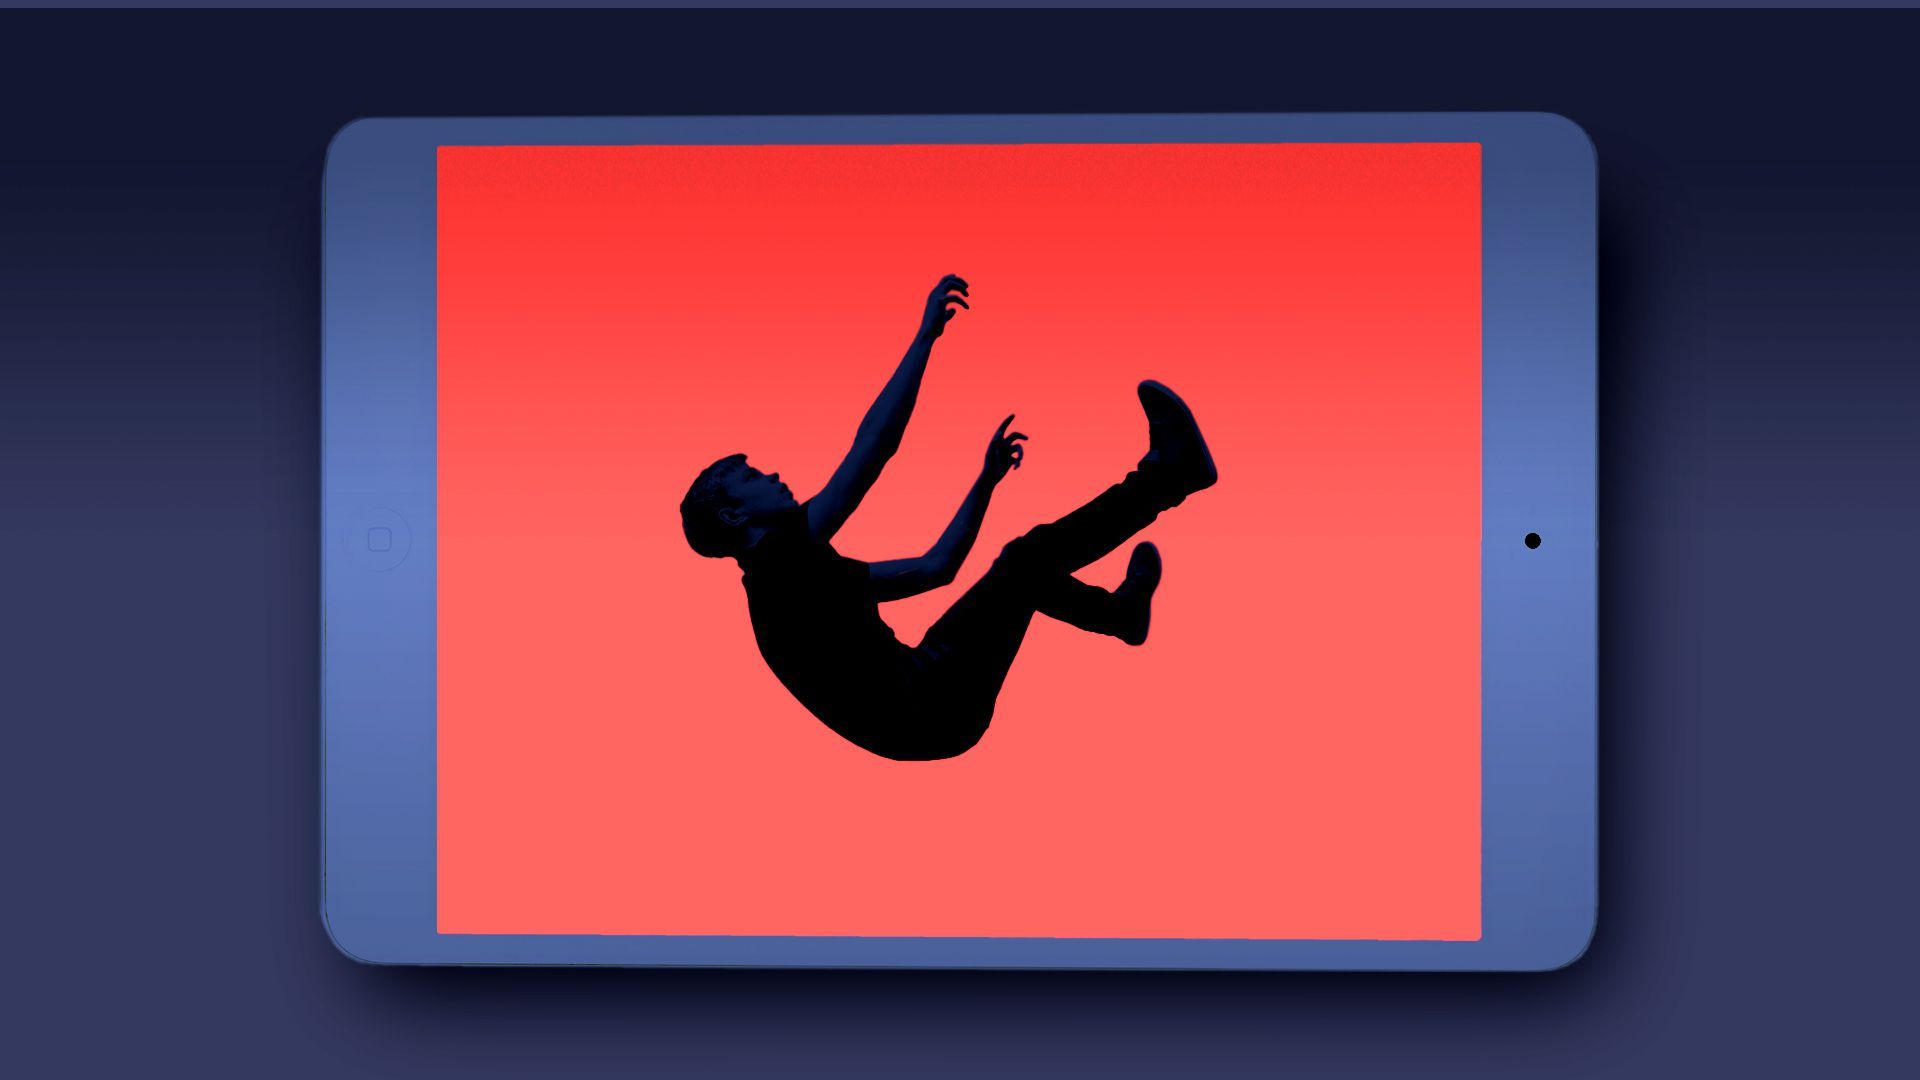 Illustration of a silhouette of a boy falling within a tablet screen